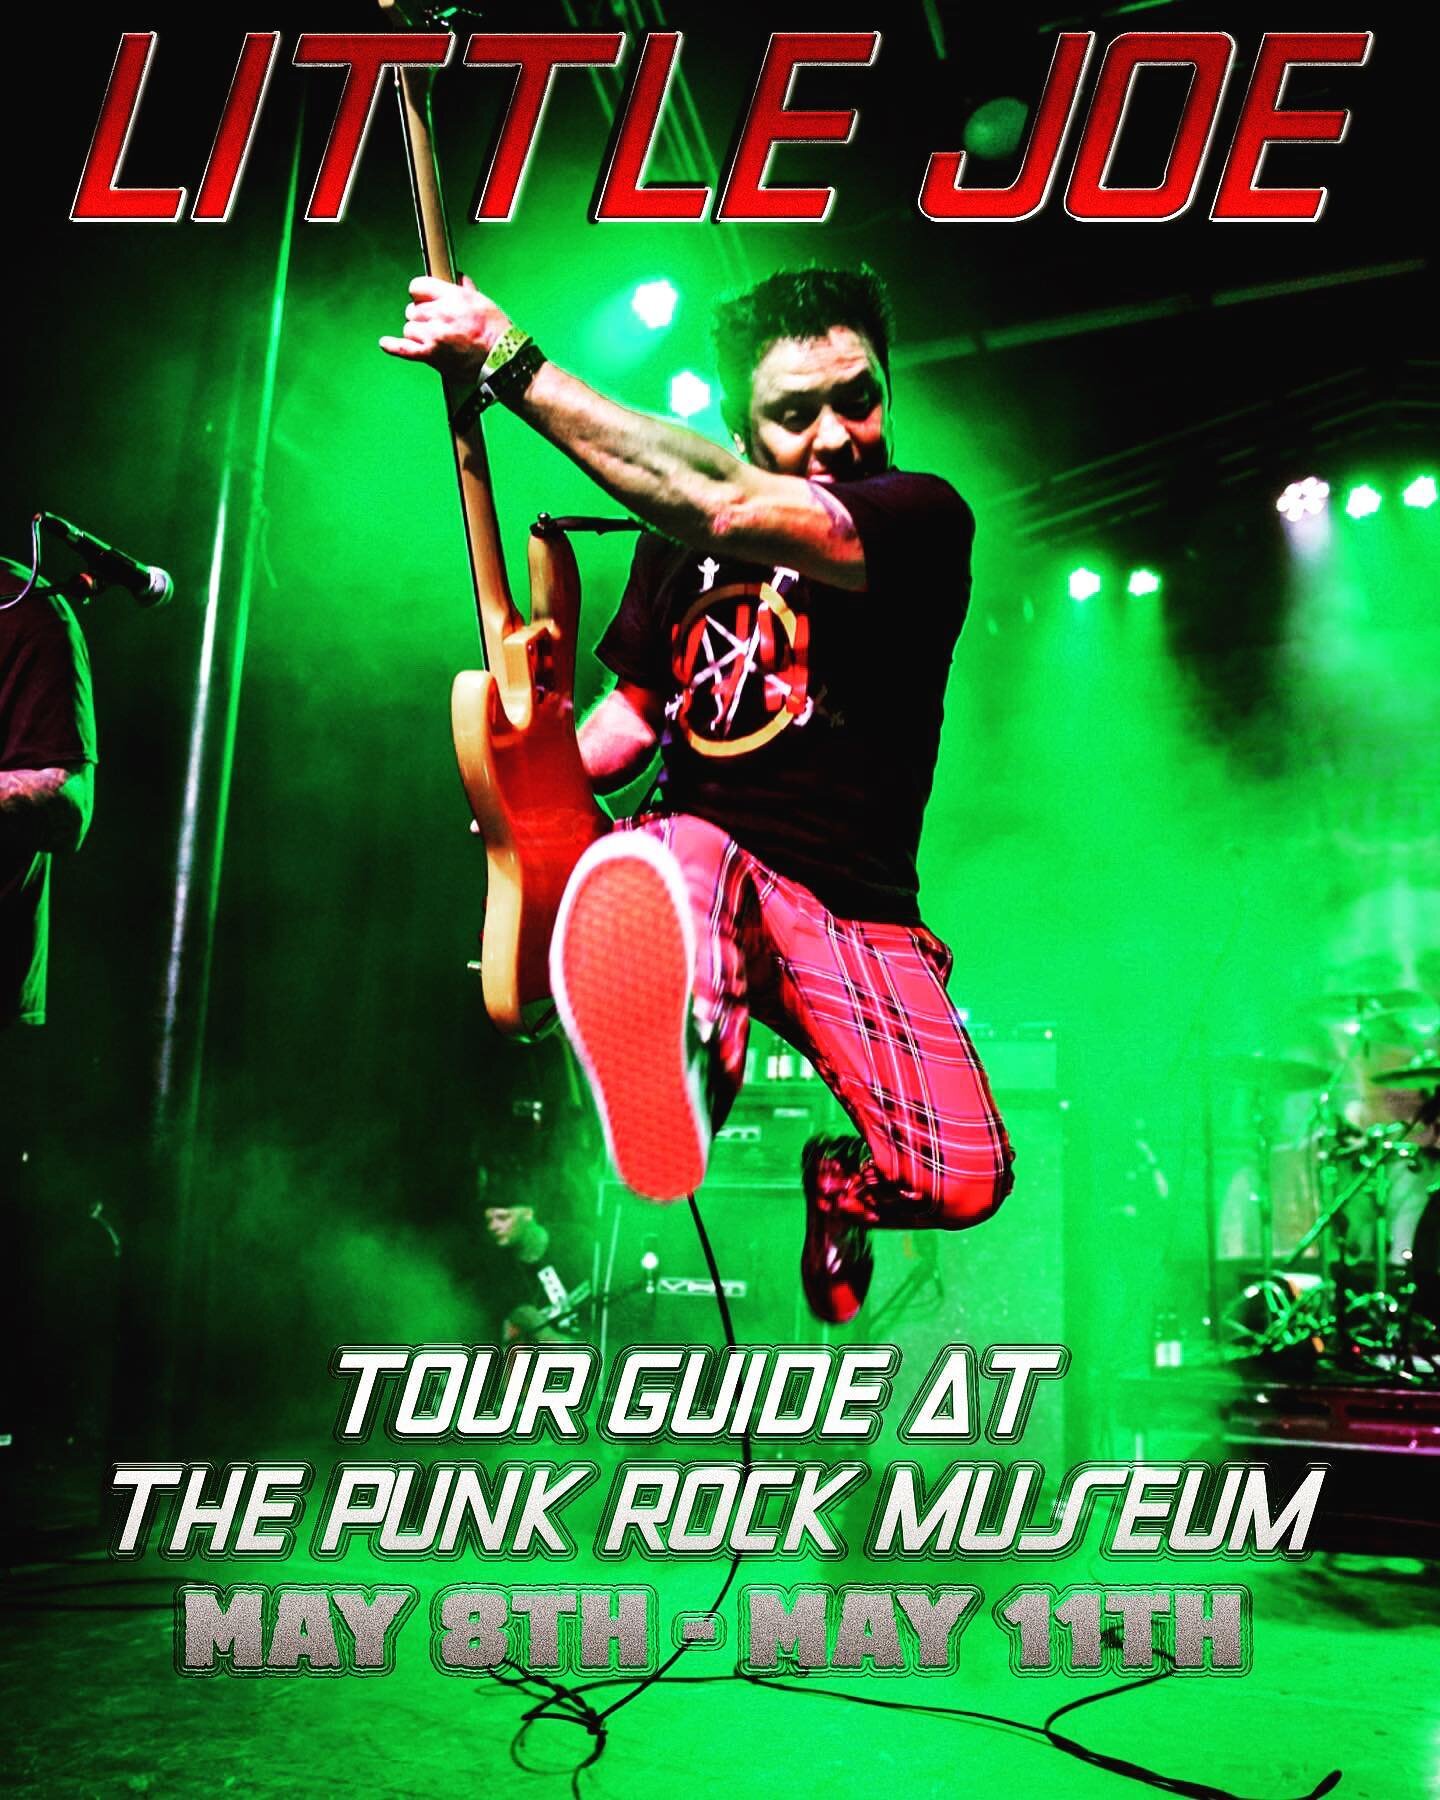 Reminder Everyone!  Lil&rsquo;Joe will be a tour guide at the punk rock museum May 8th to May 11th! Everyone who books a tour online will have a chance to win a hand drawn pickguard signed and numbered for each tour! So get in the game and book now! 